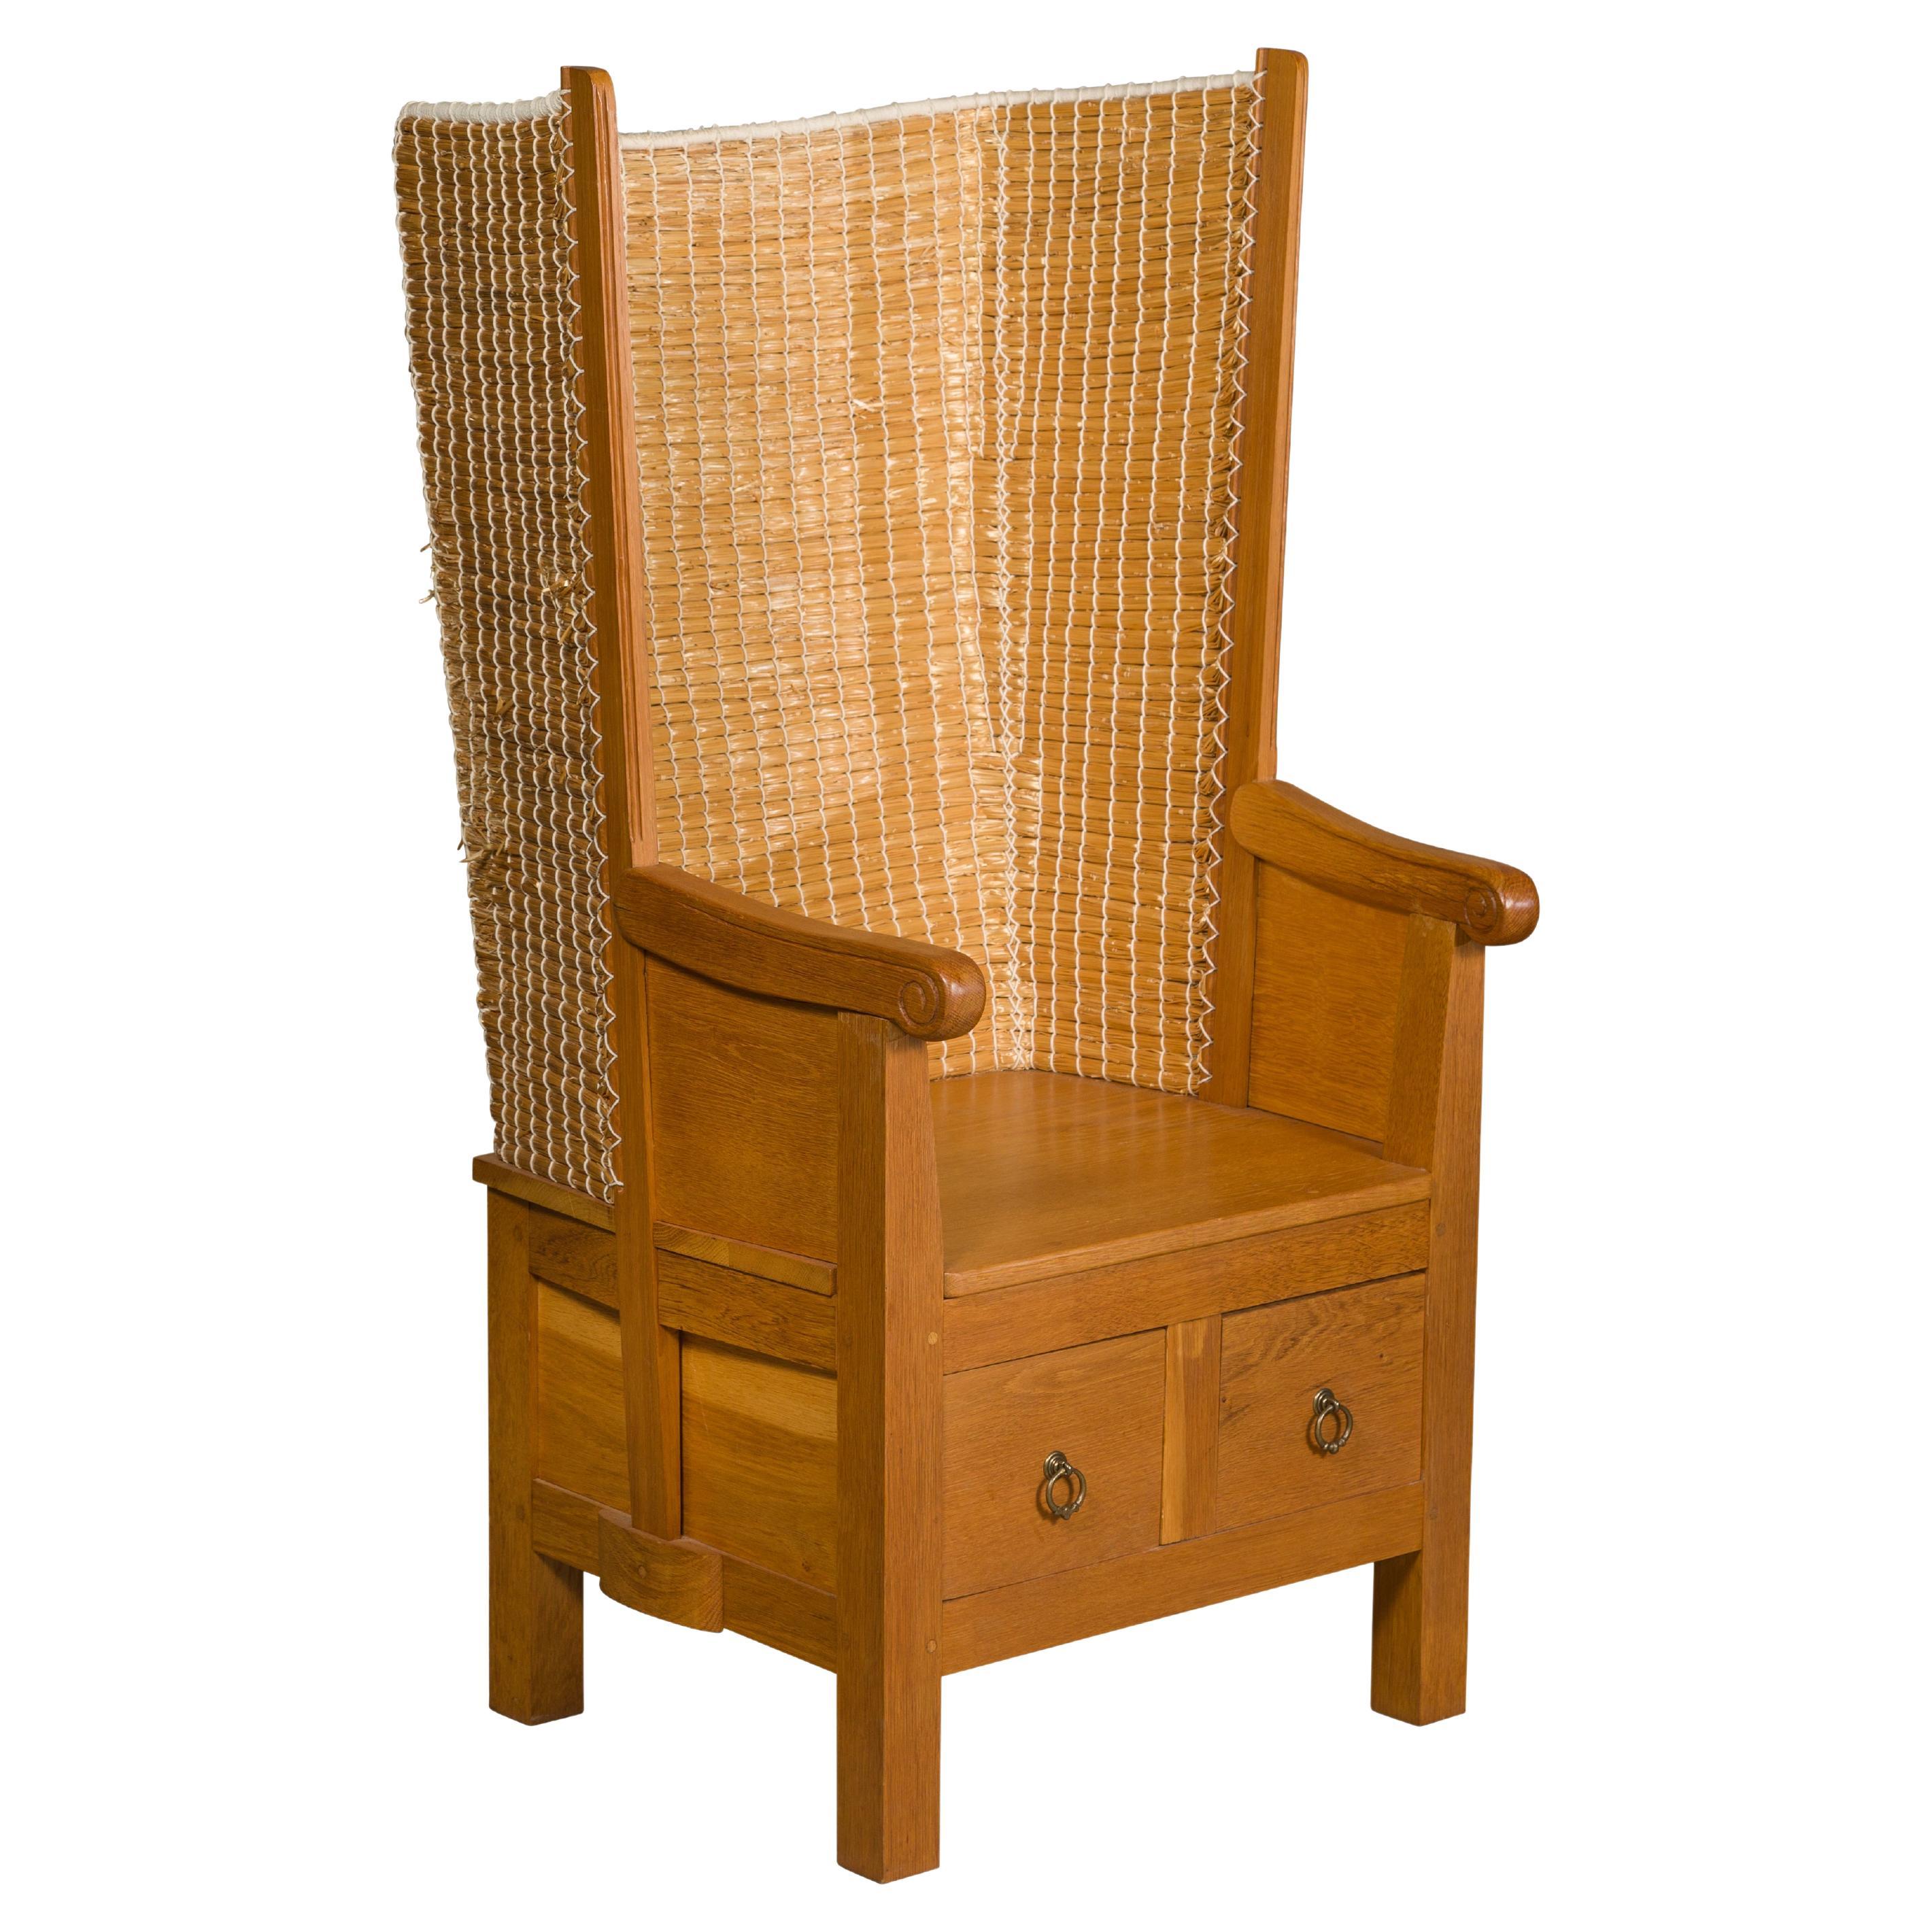 What are Orkney chairs made from?